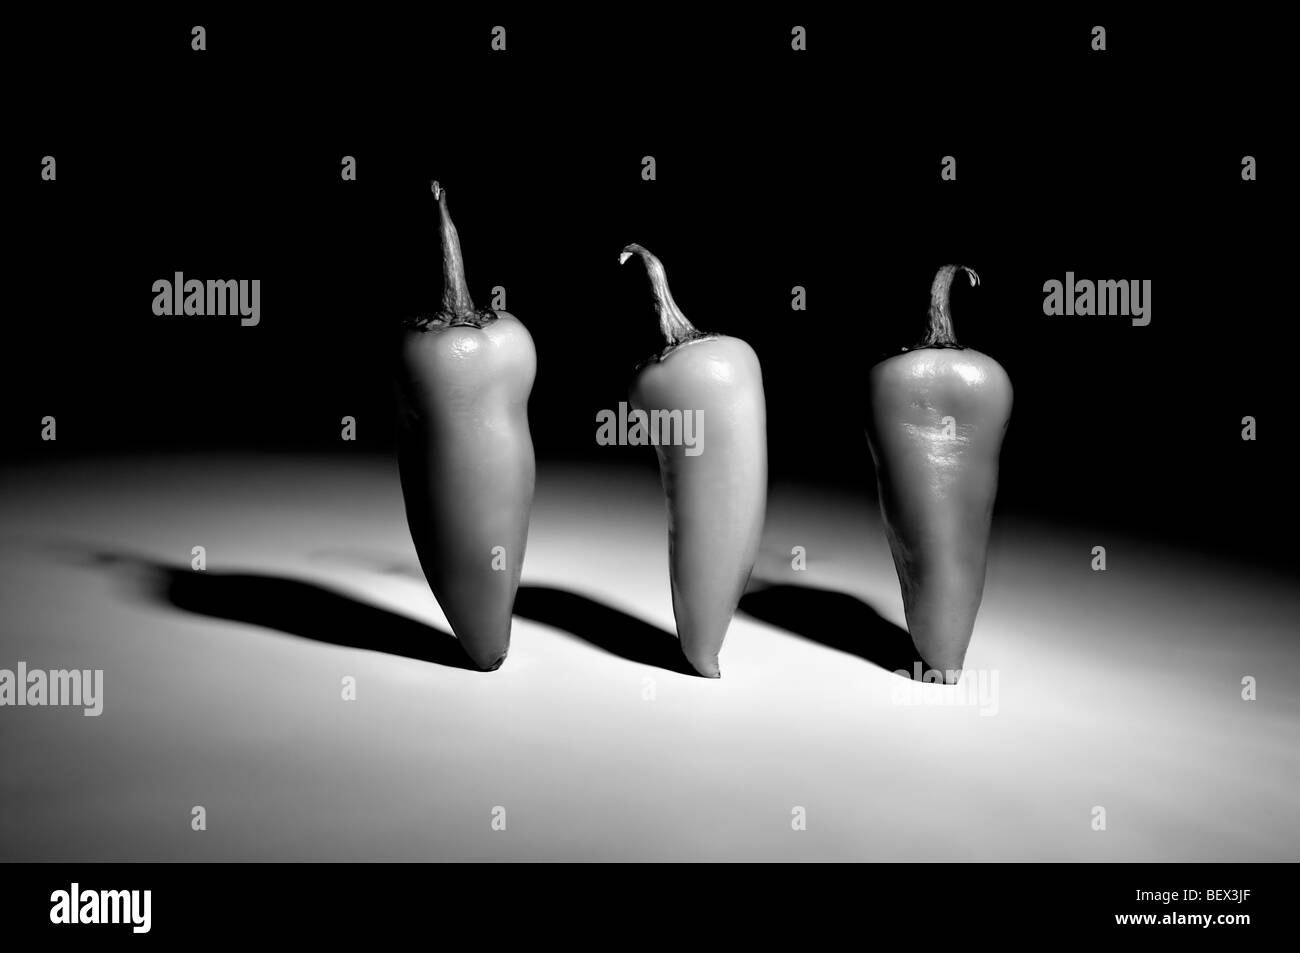 Black and white artistic studio shot of three chillies standing up taken with dramatic lighting to give shadows Stock Photo